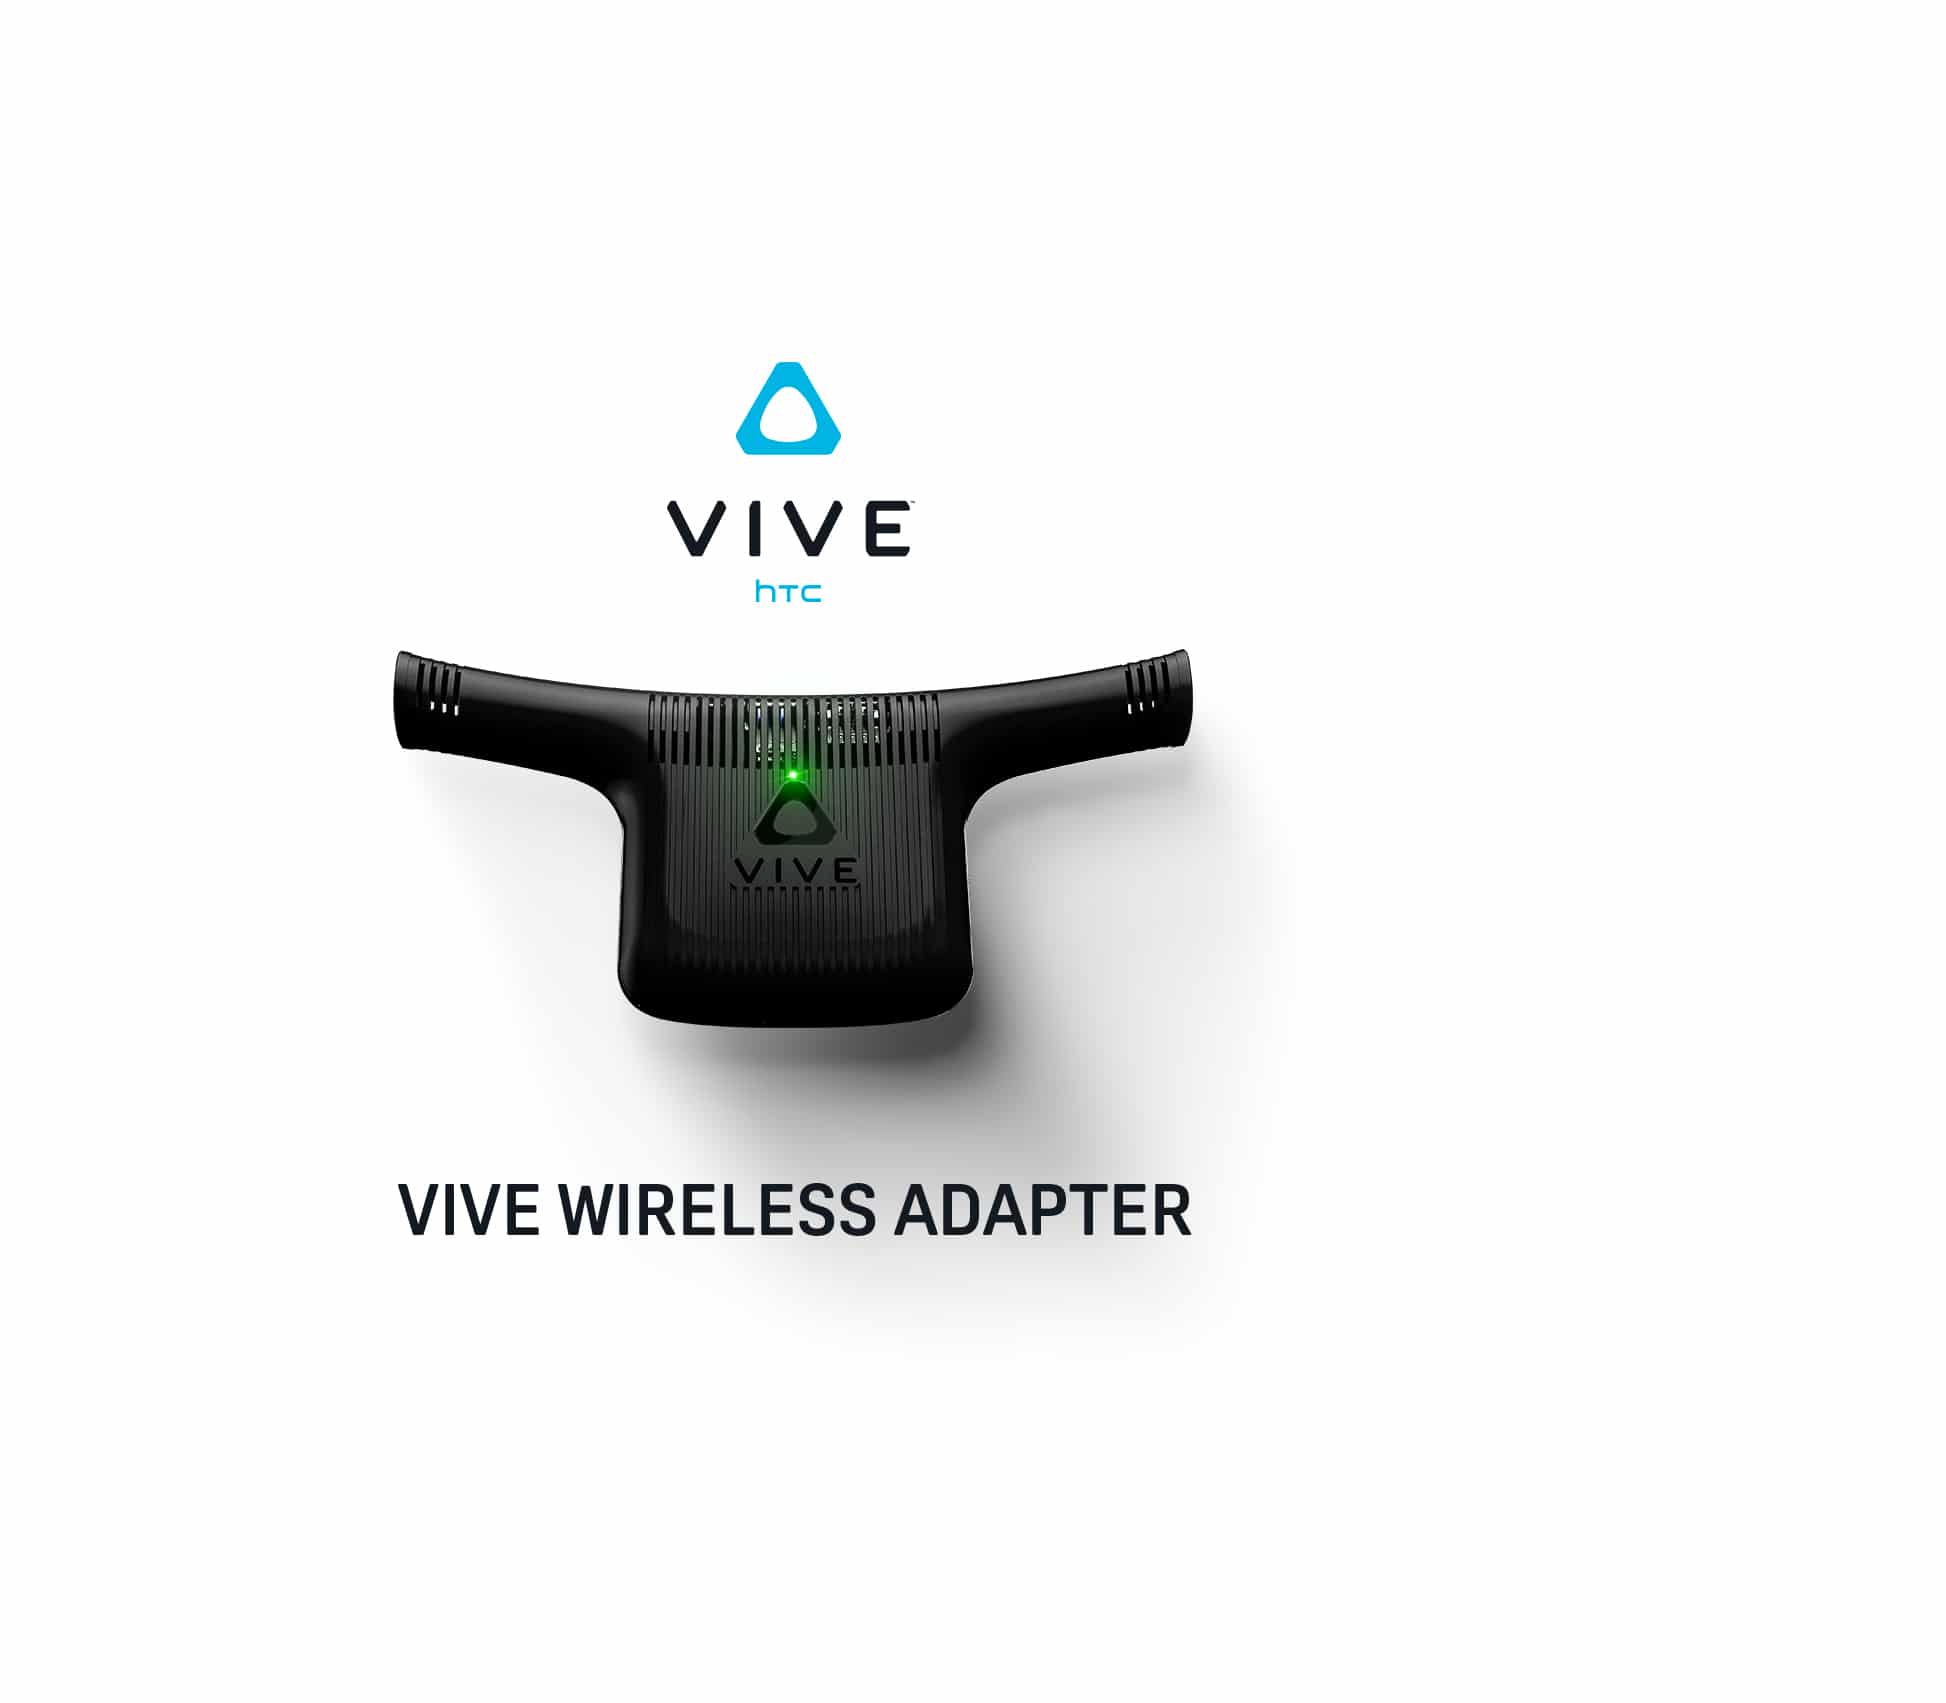 HTC Vive goes wireless with wireless adapter